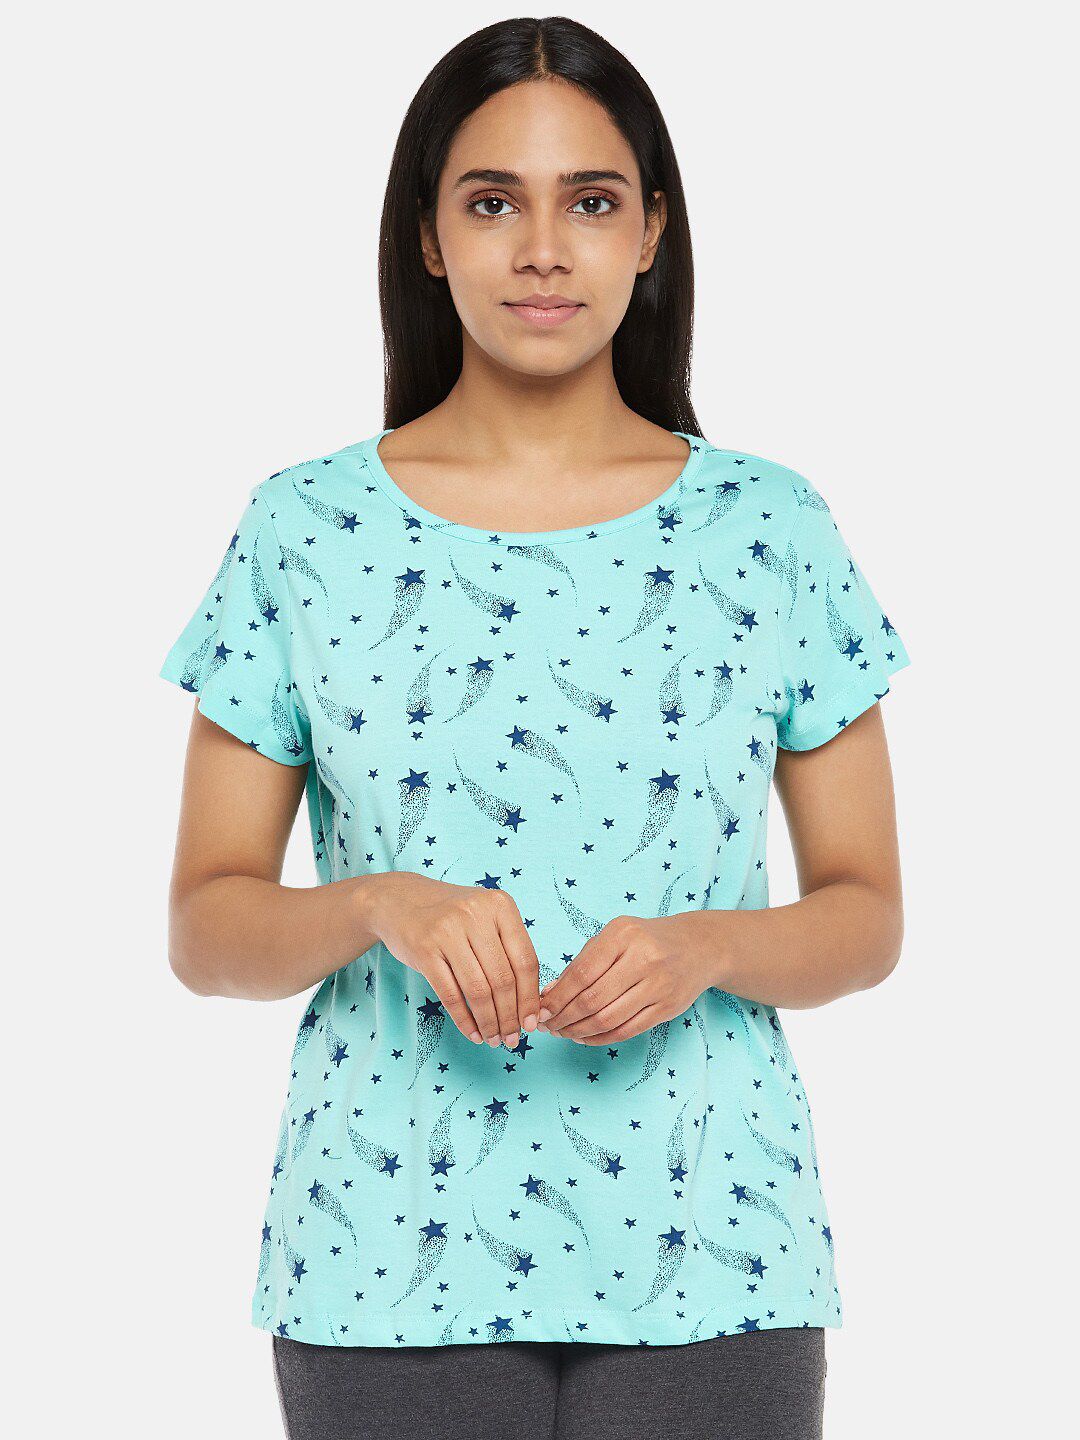 Dreamz by Pantaloons Turquoise Blue Regular Lounge tshirt Price in India